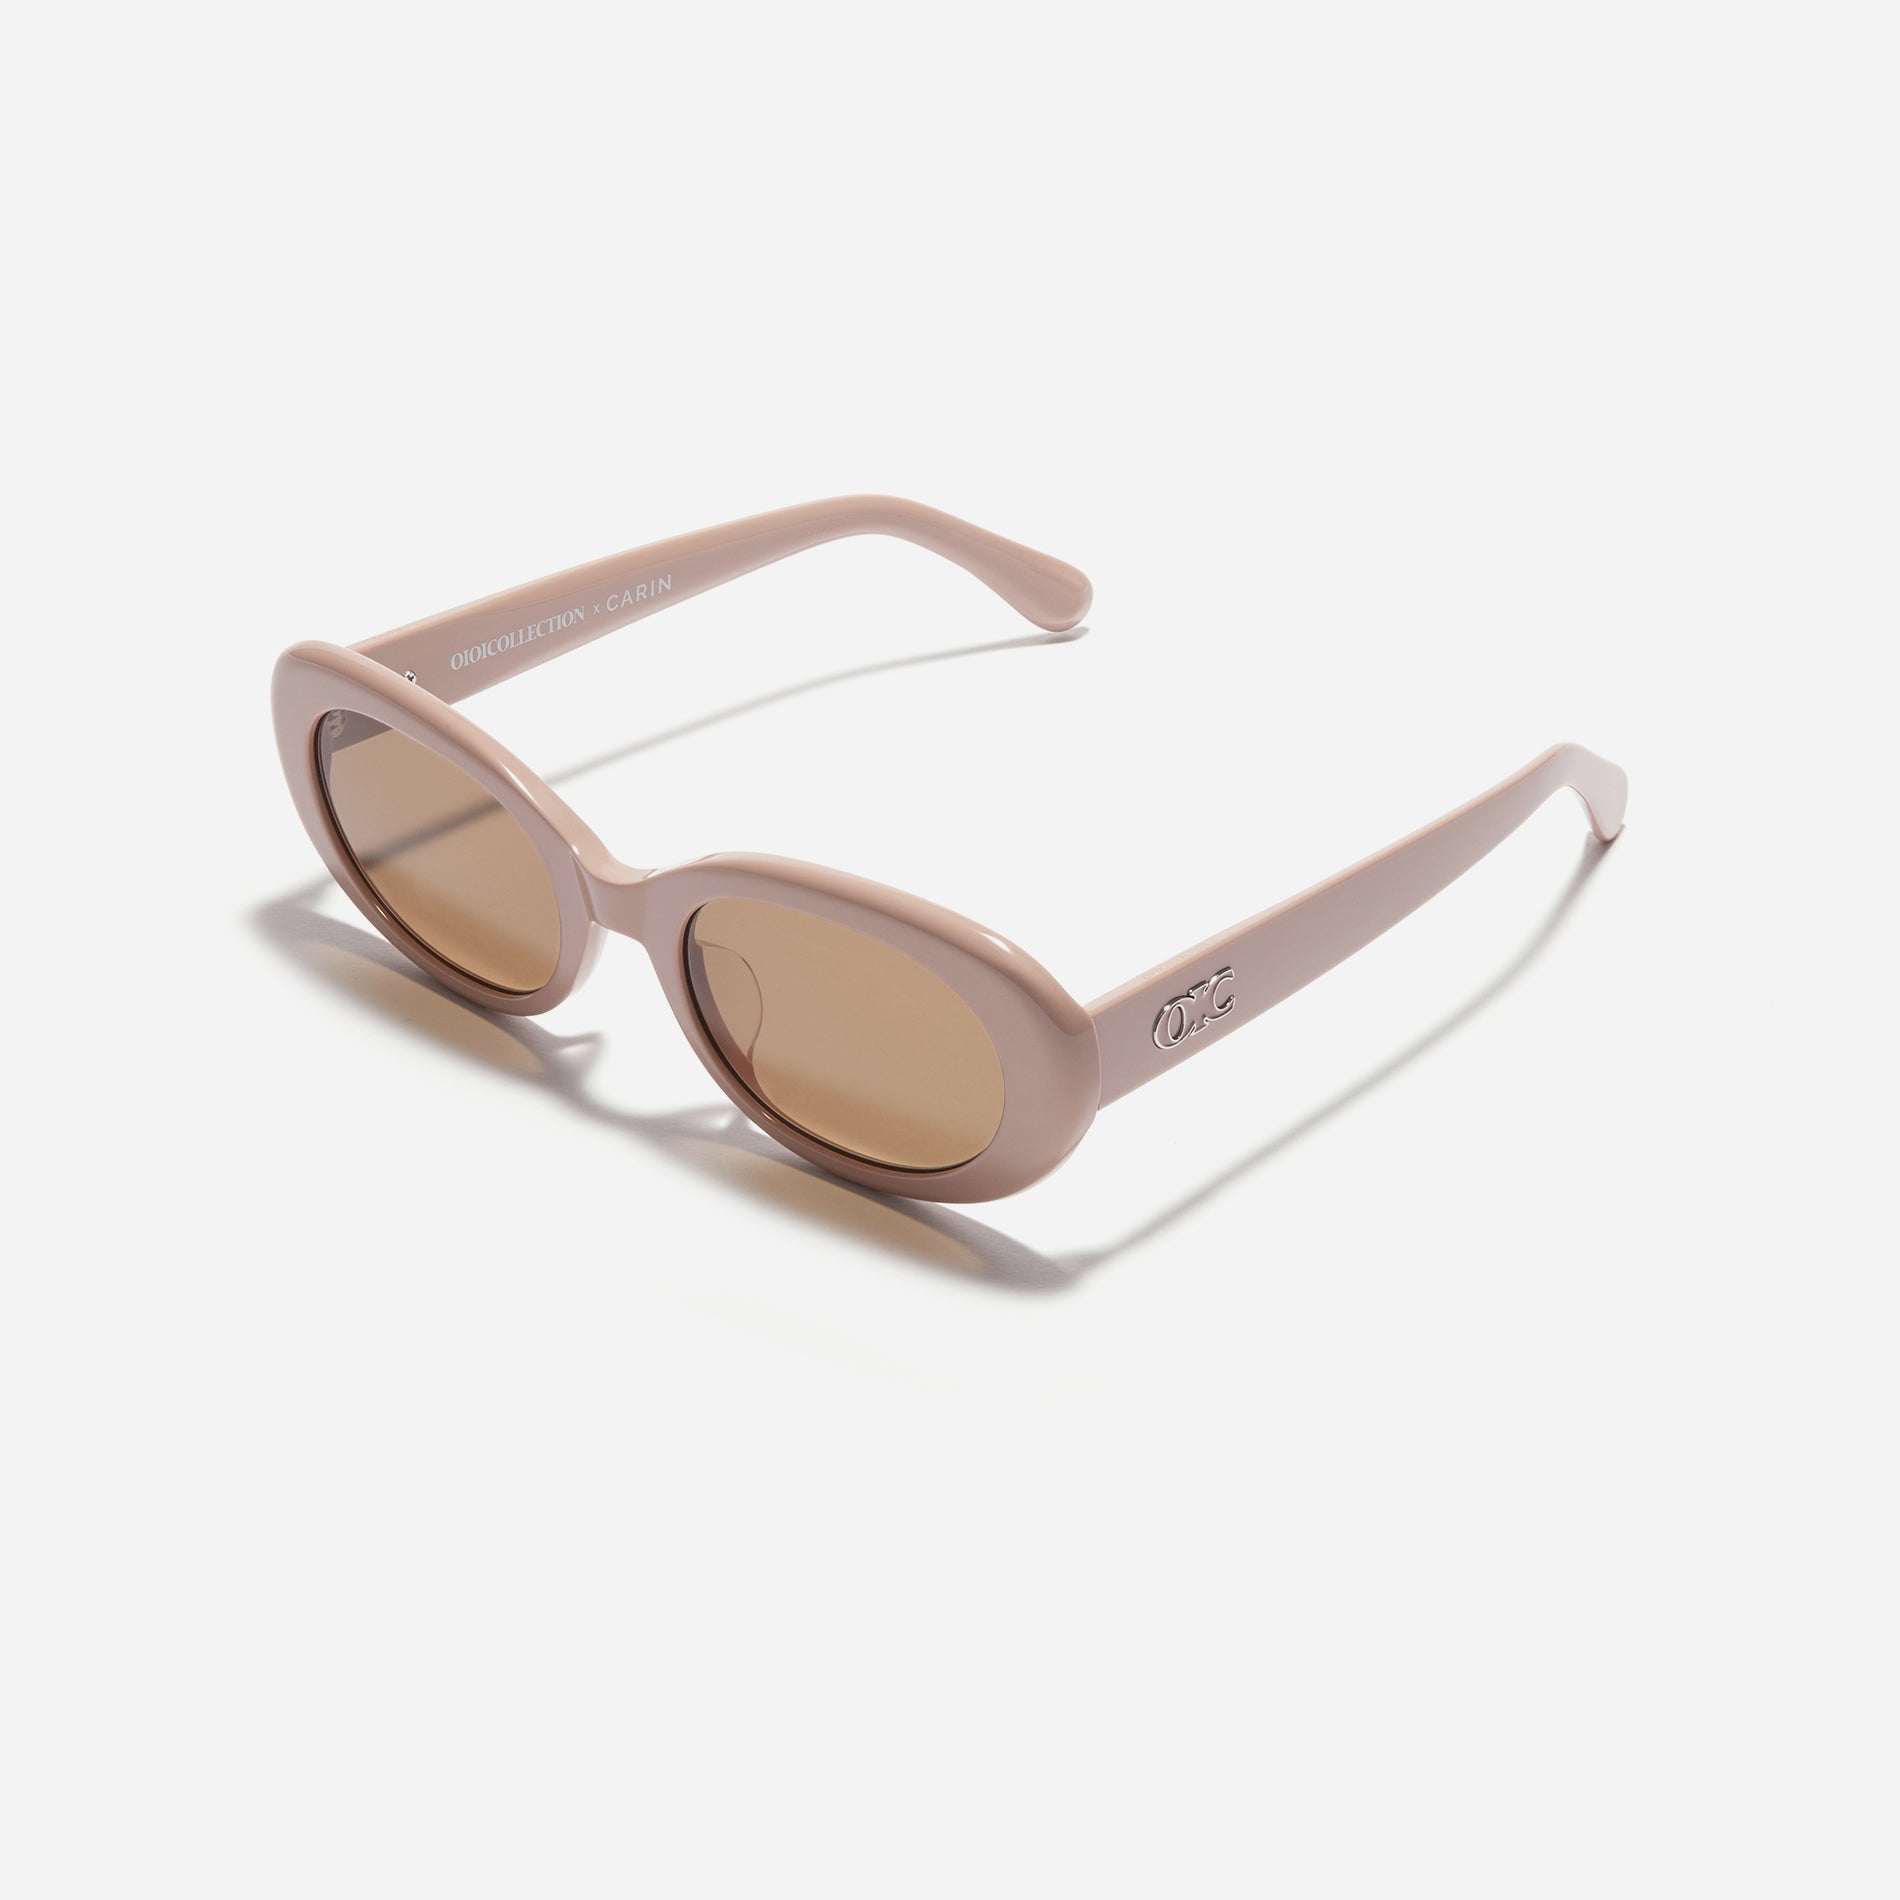 Born from the CARIN x OIOICOLLECTION collaboration, the CIRCLE sunglasses are designed with a sleek narrow rim style that gives a modern twist to the '90s retro vibe. The temples showcase a newly redesigned OIC logo emblem, highlighted by a soft color palette, adding a touch of fashion-forward style.